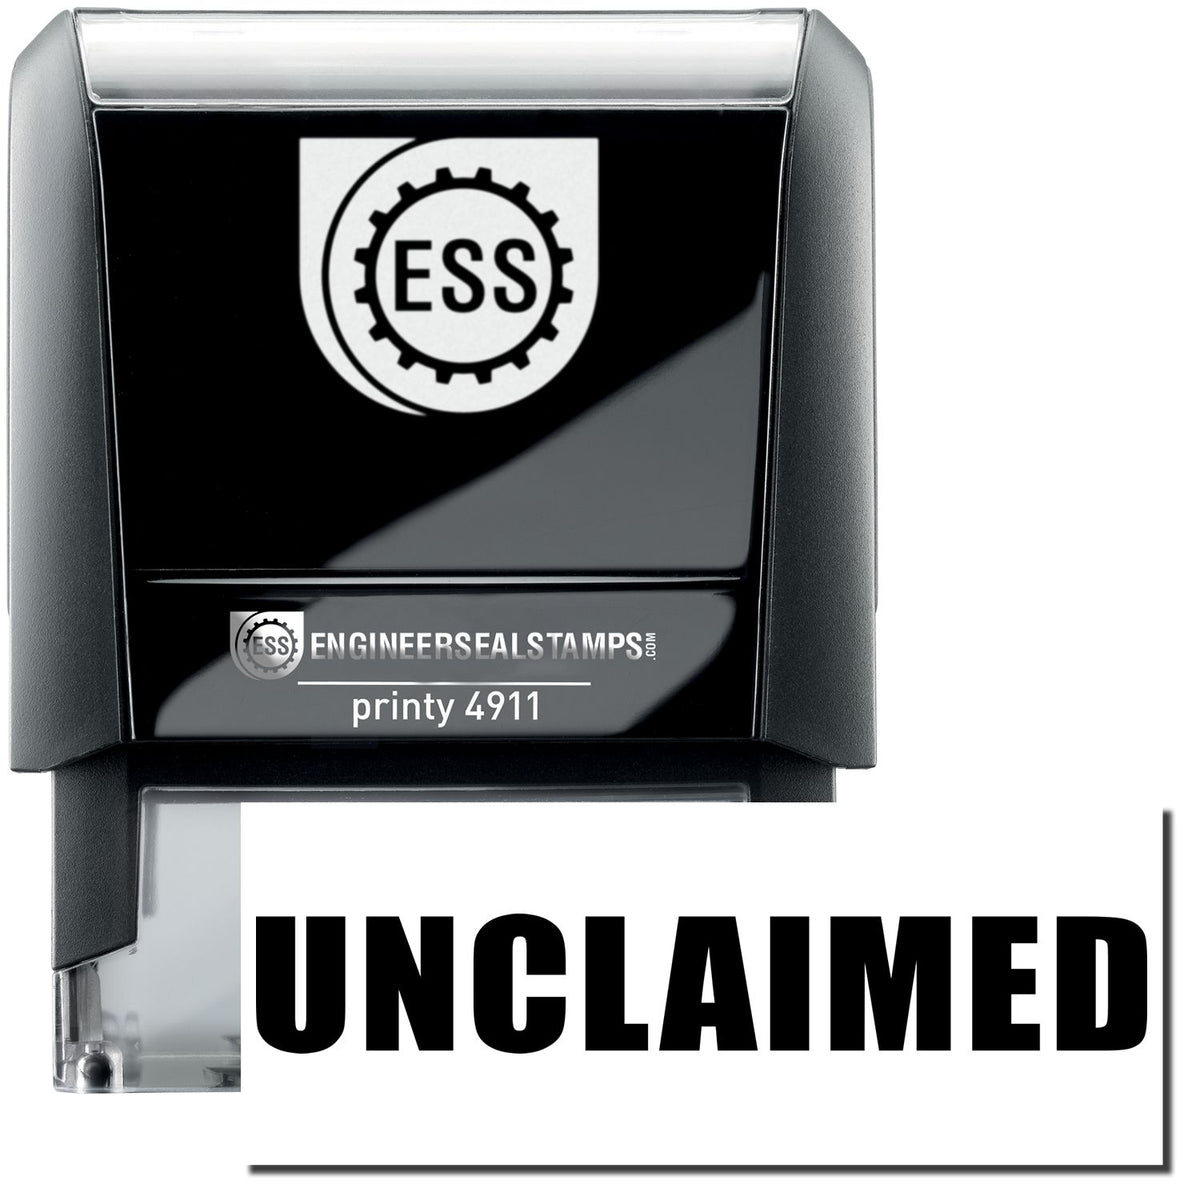 A self-inking stamp with a stamped image showing how the text &quot;UNCLAIMED&quot; is displayed after stamping.